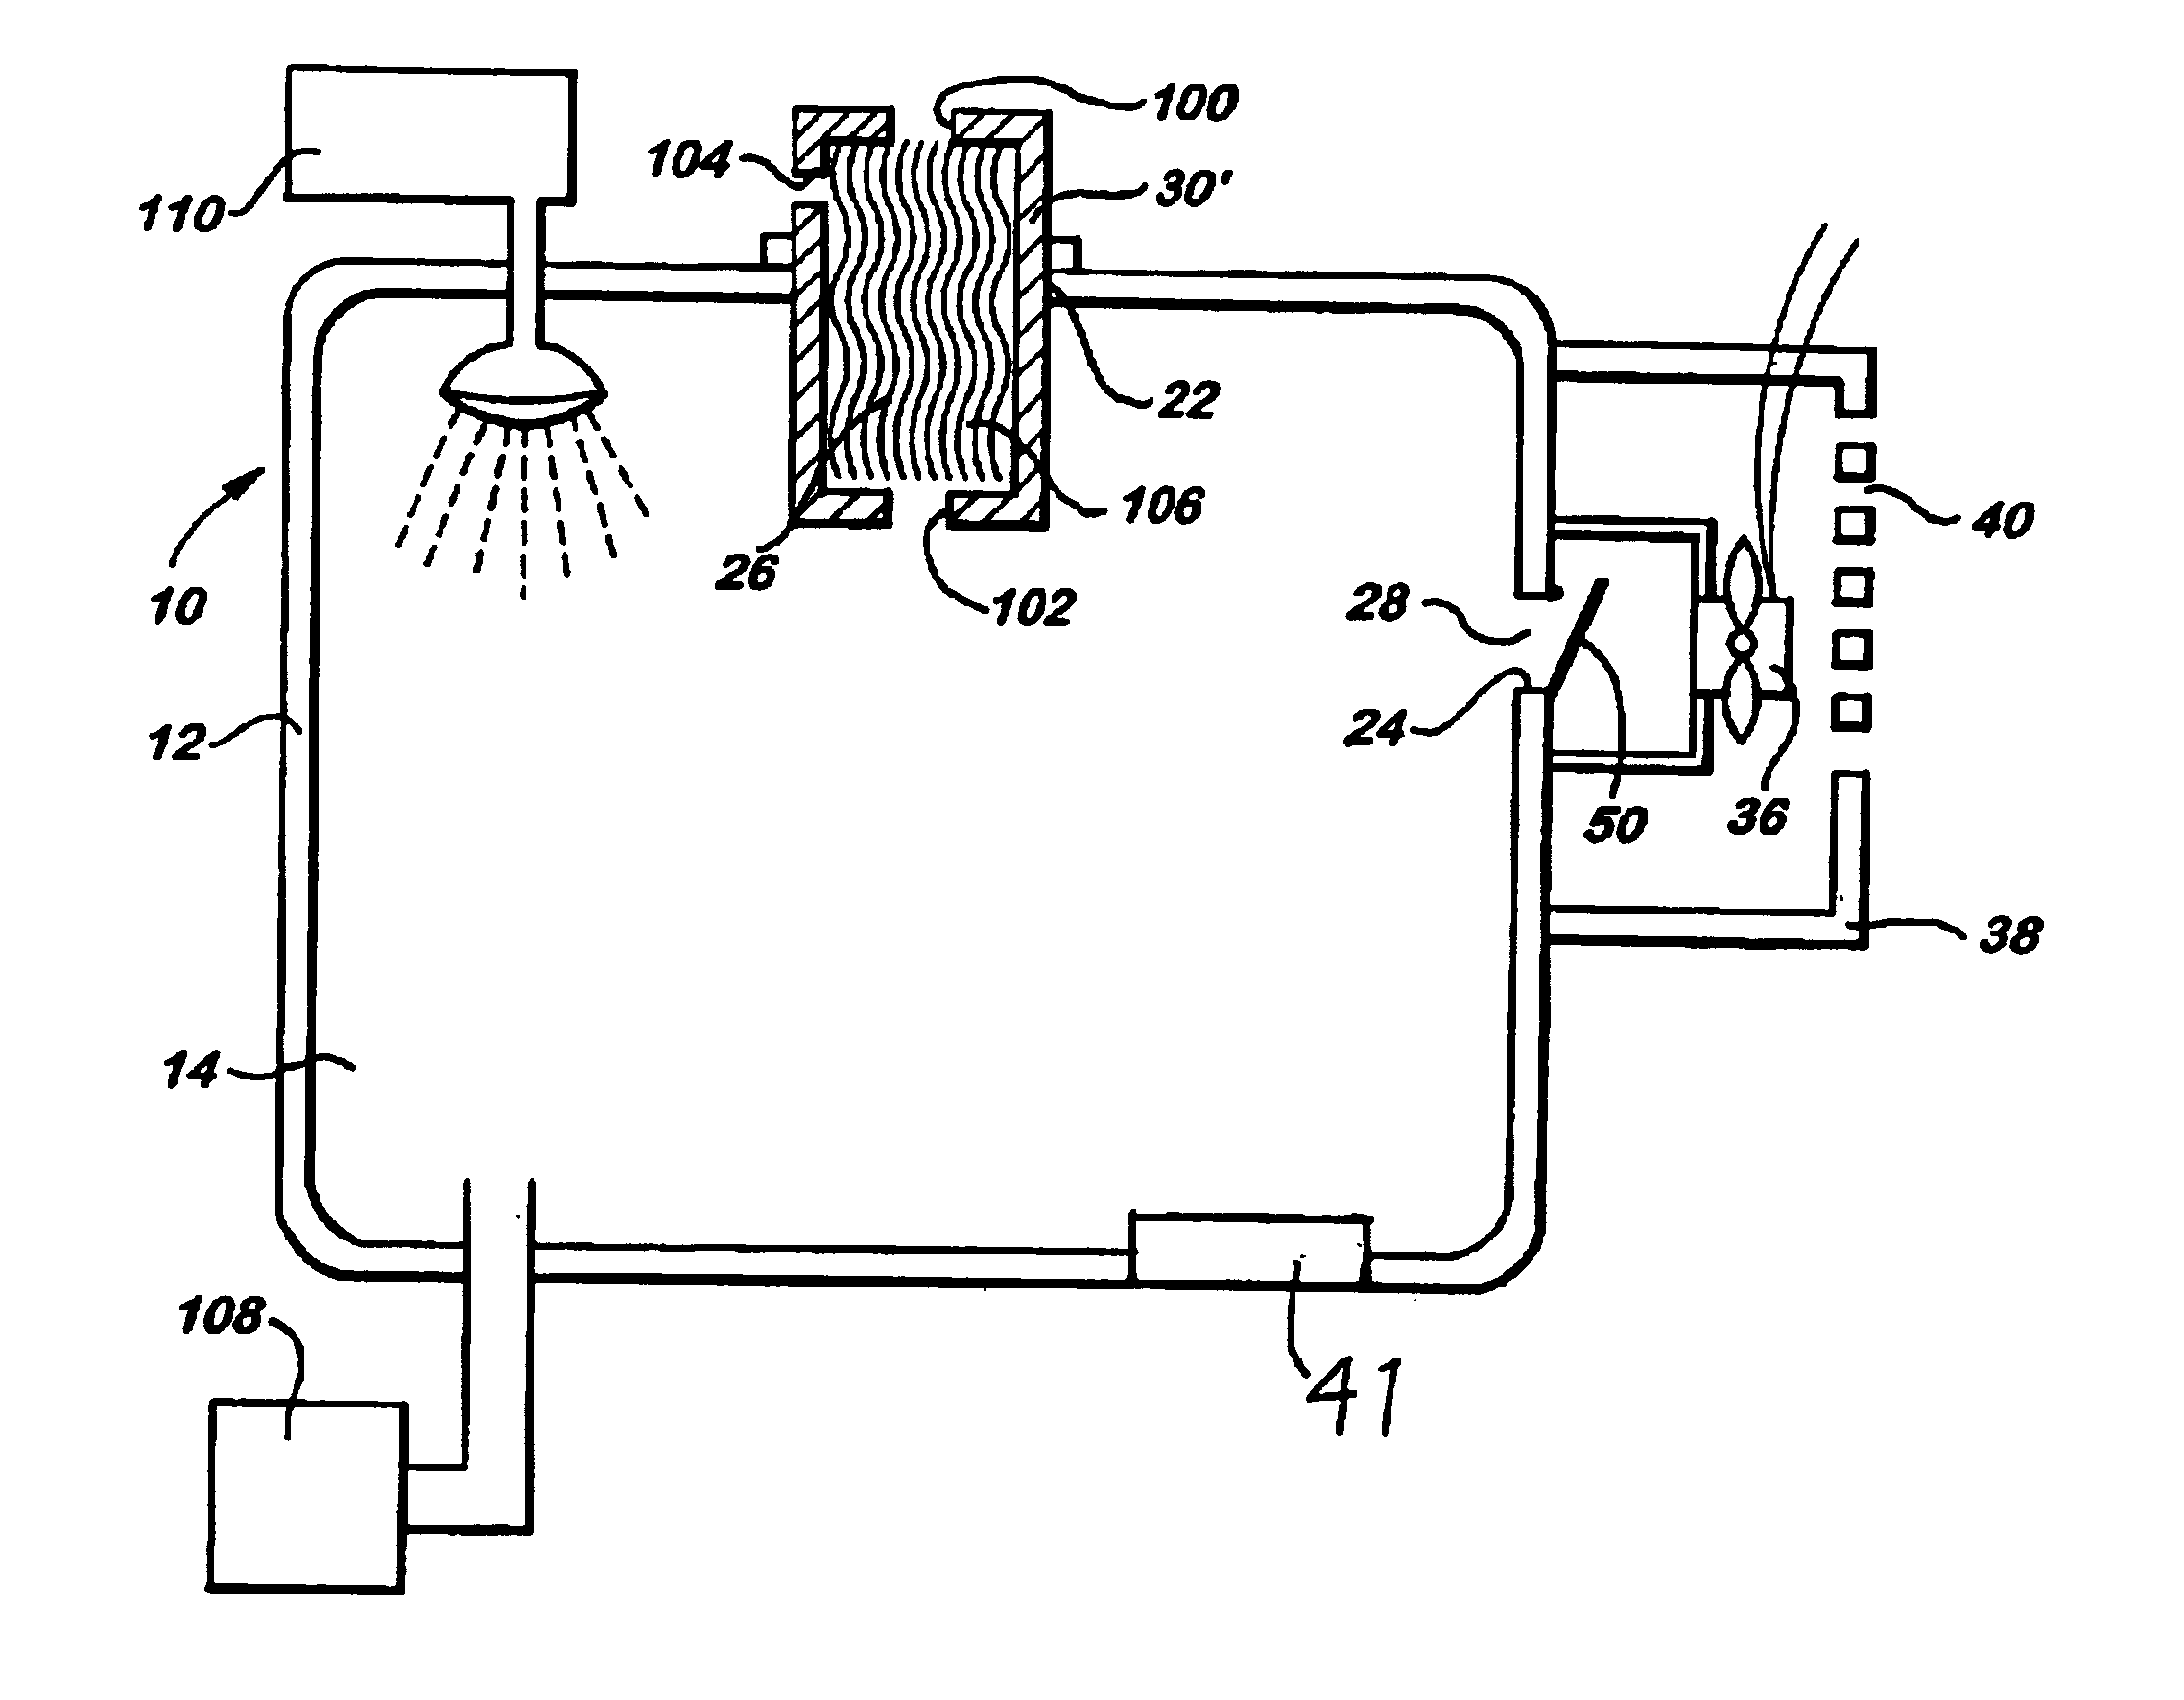 Storage device utilizing a differentially permeable membrane to control gaseous content